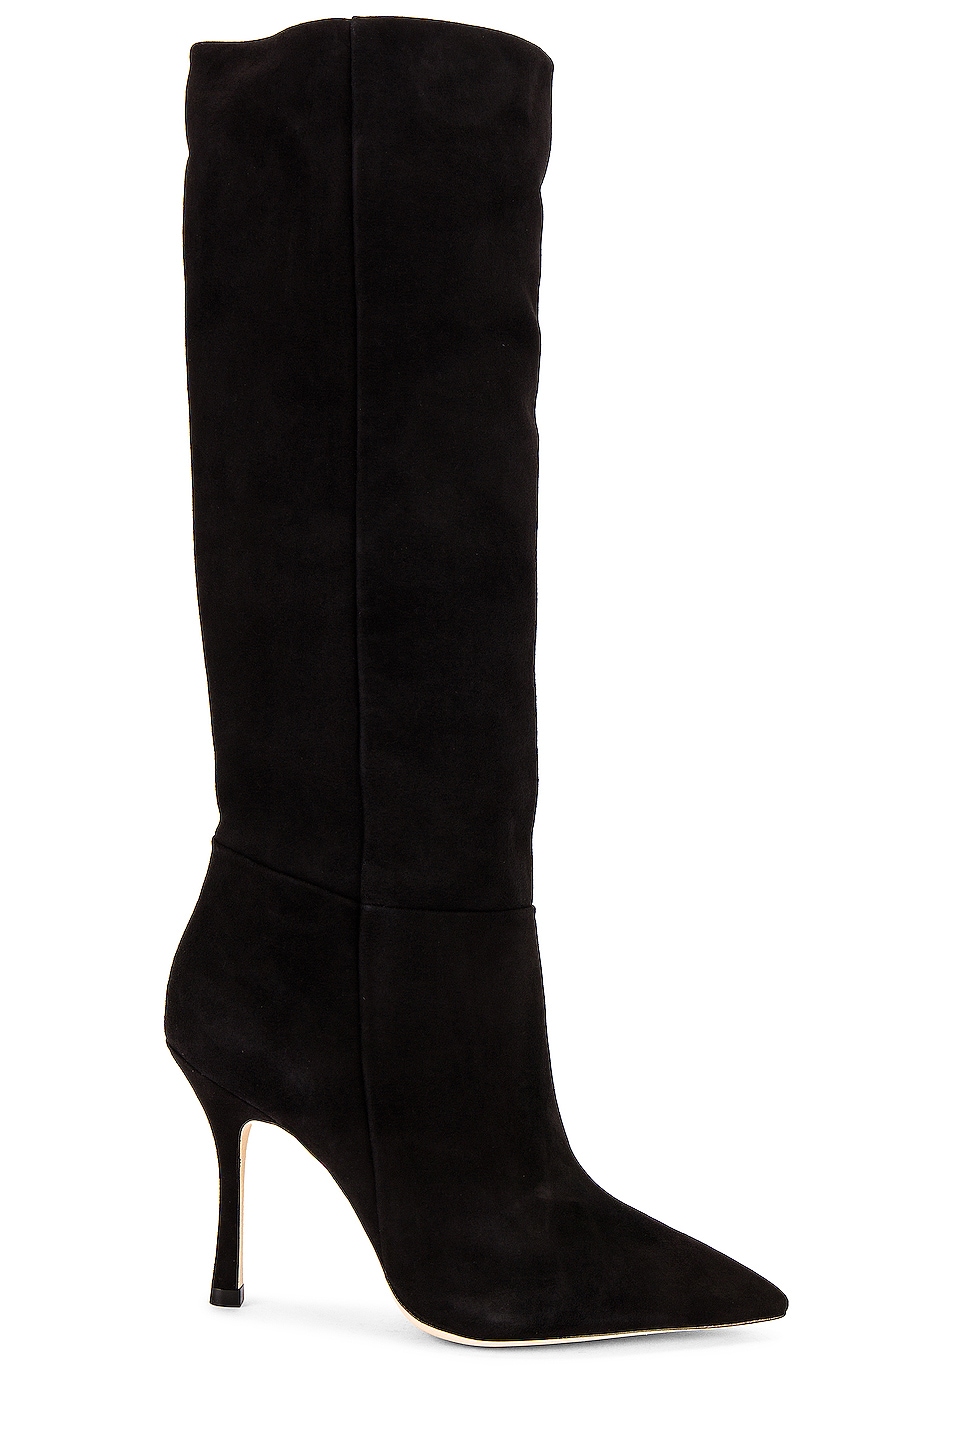 Image 1 of The Kate Boot in Black